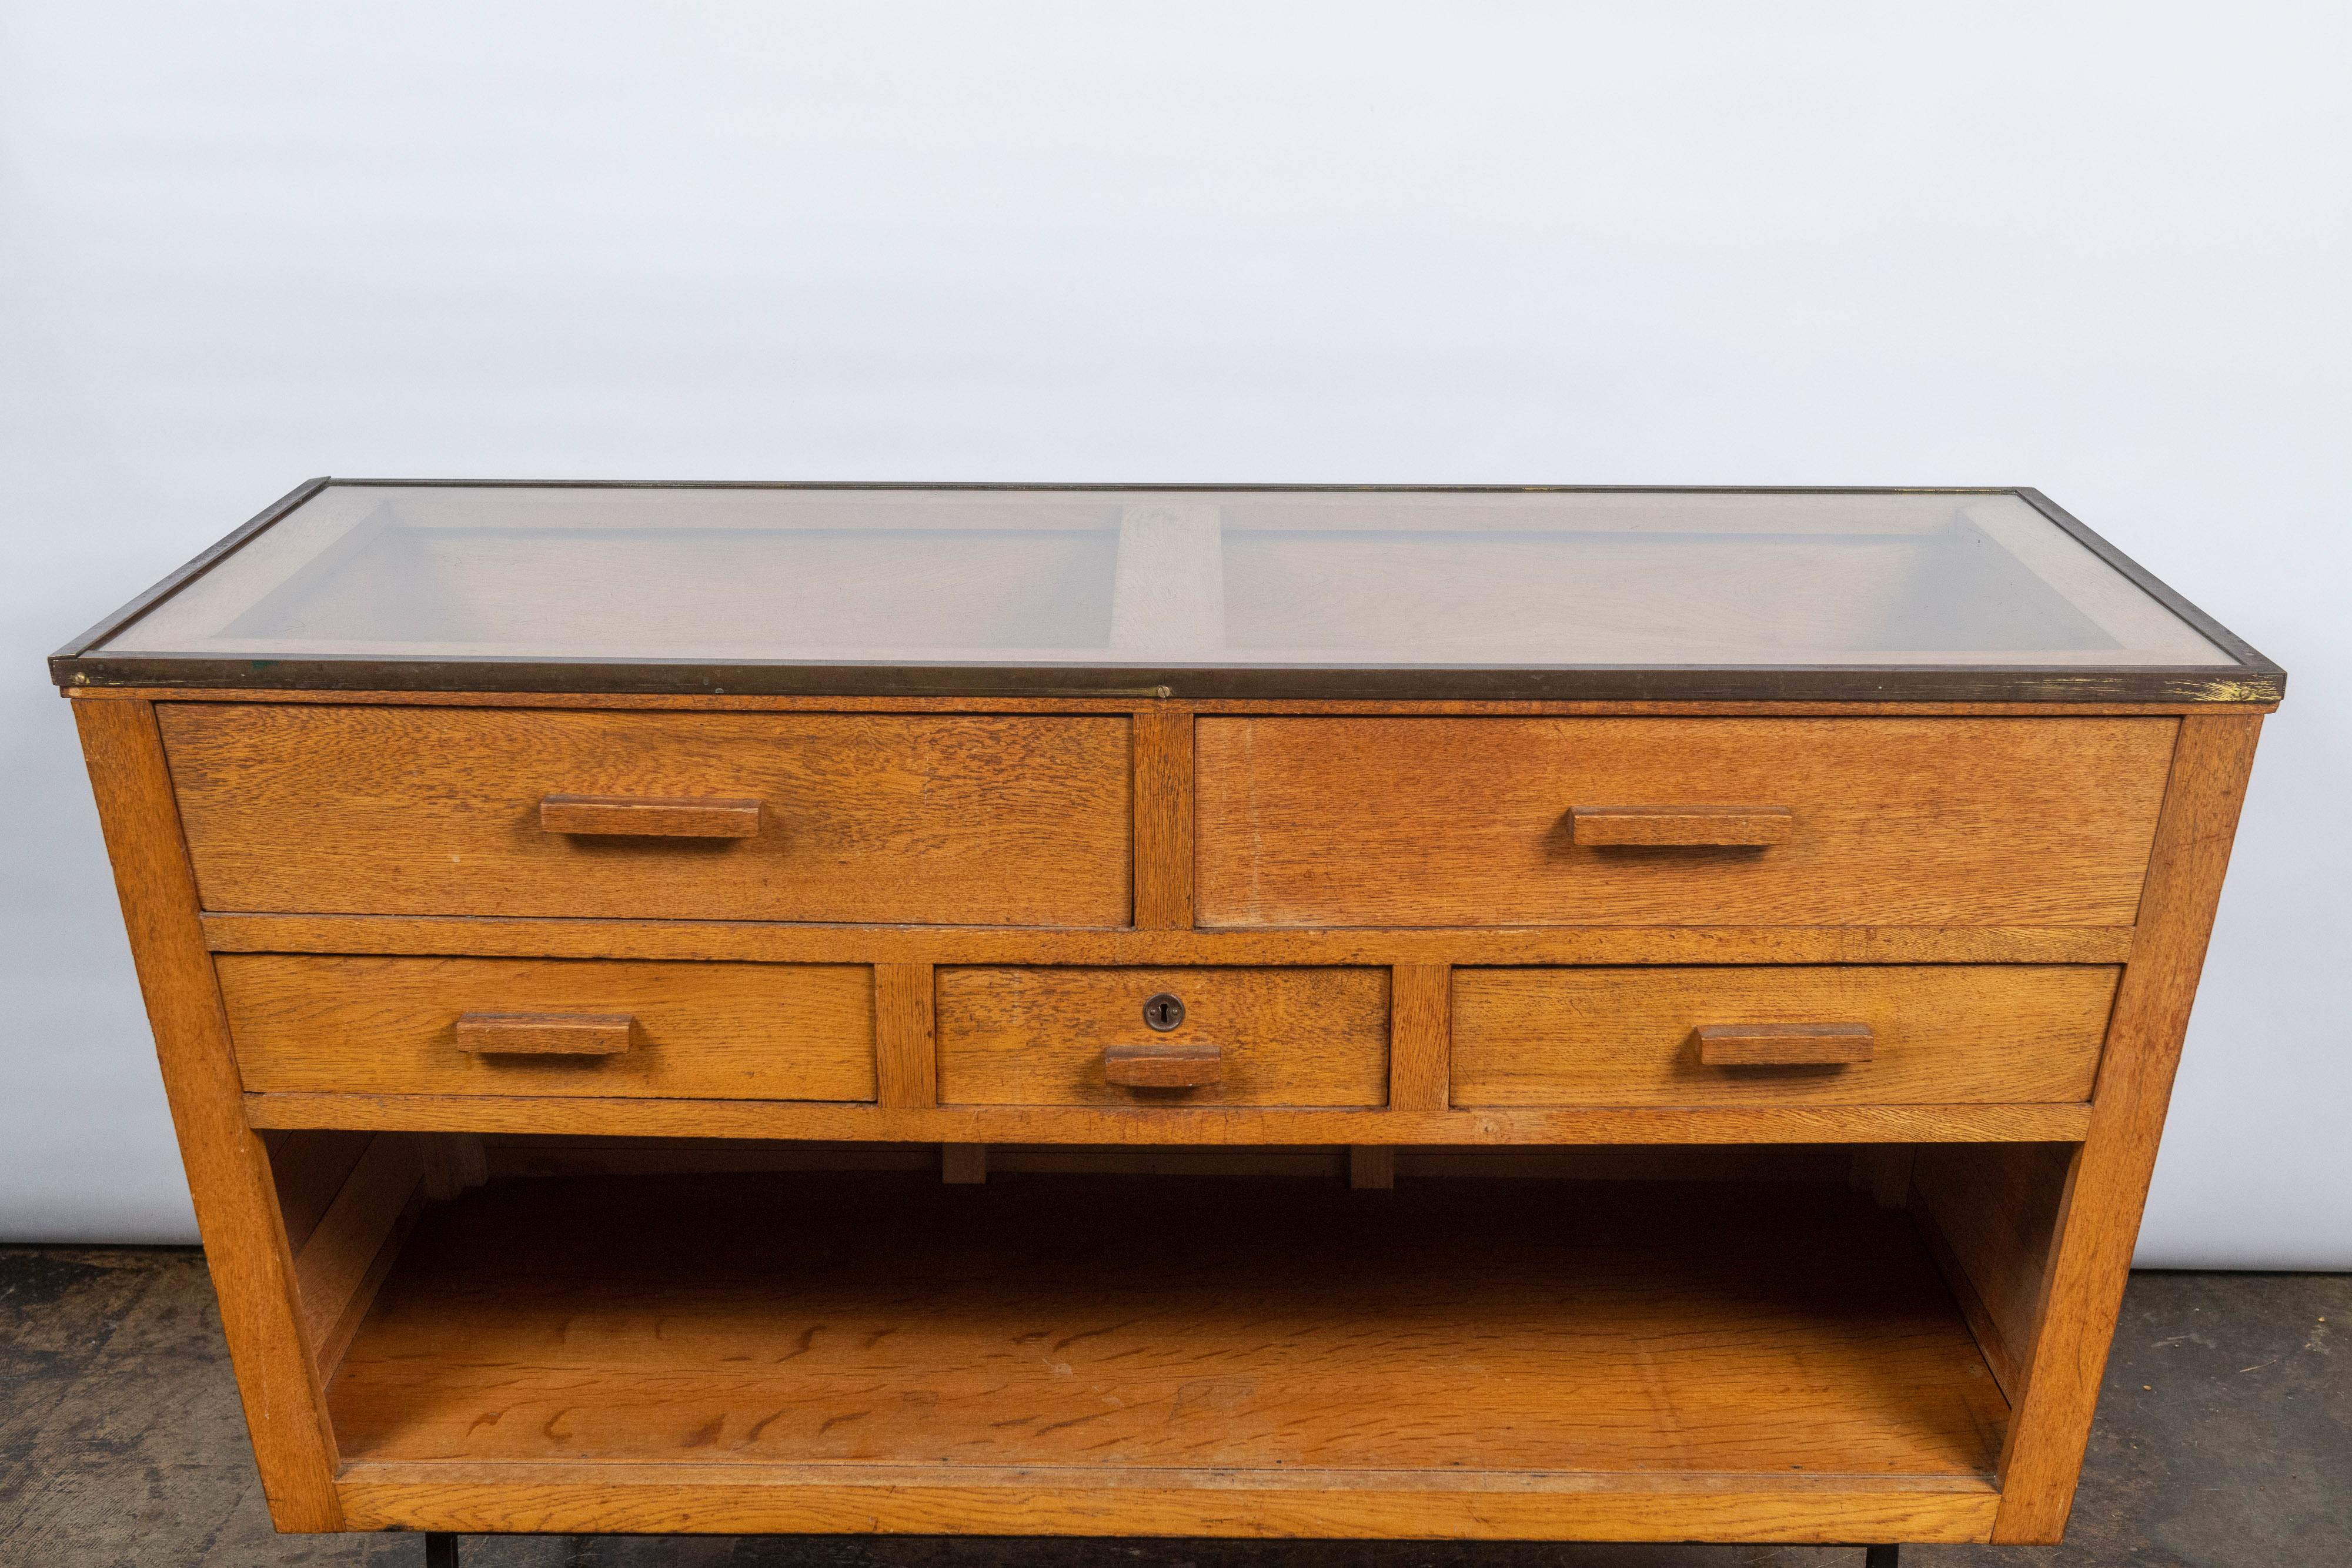 This vintage Art Deco cabinet in solid oak has a trapezoid shape, with two large drawers beneath a glass top trimmed in brass, three smaller drawers beneath, and a large storage space below, which sits upon metal legs. Great for displaying jewelry,